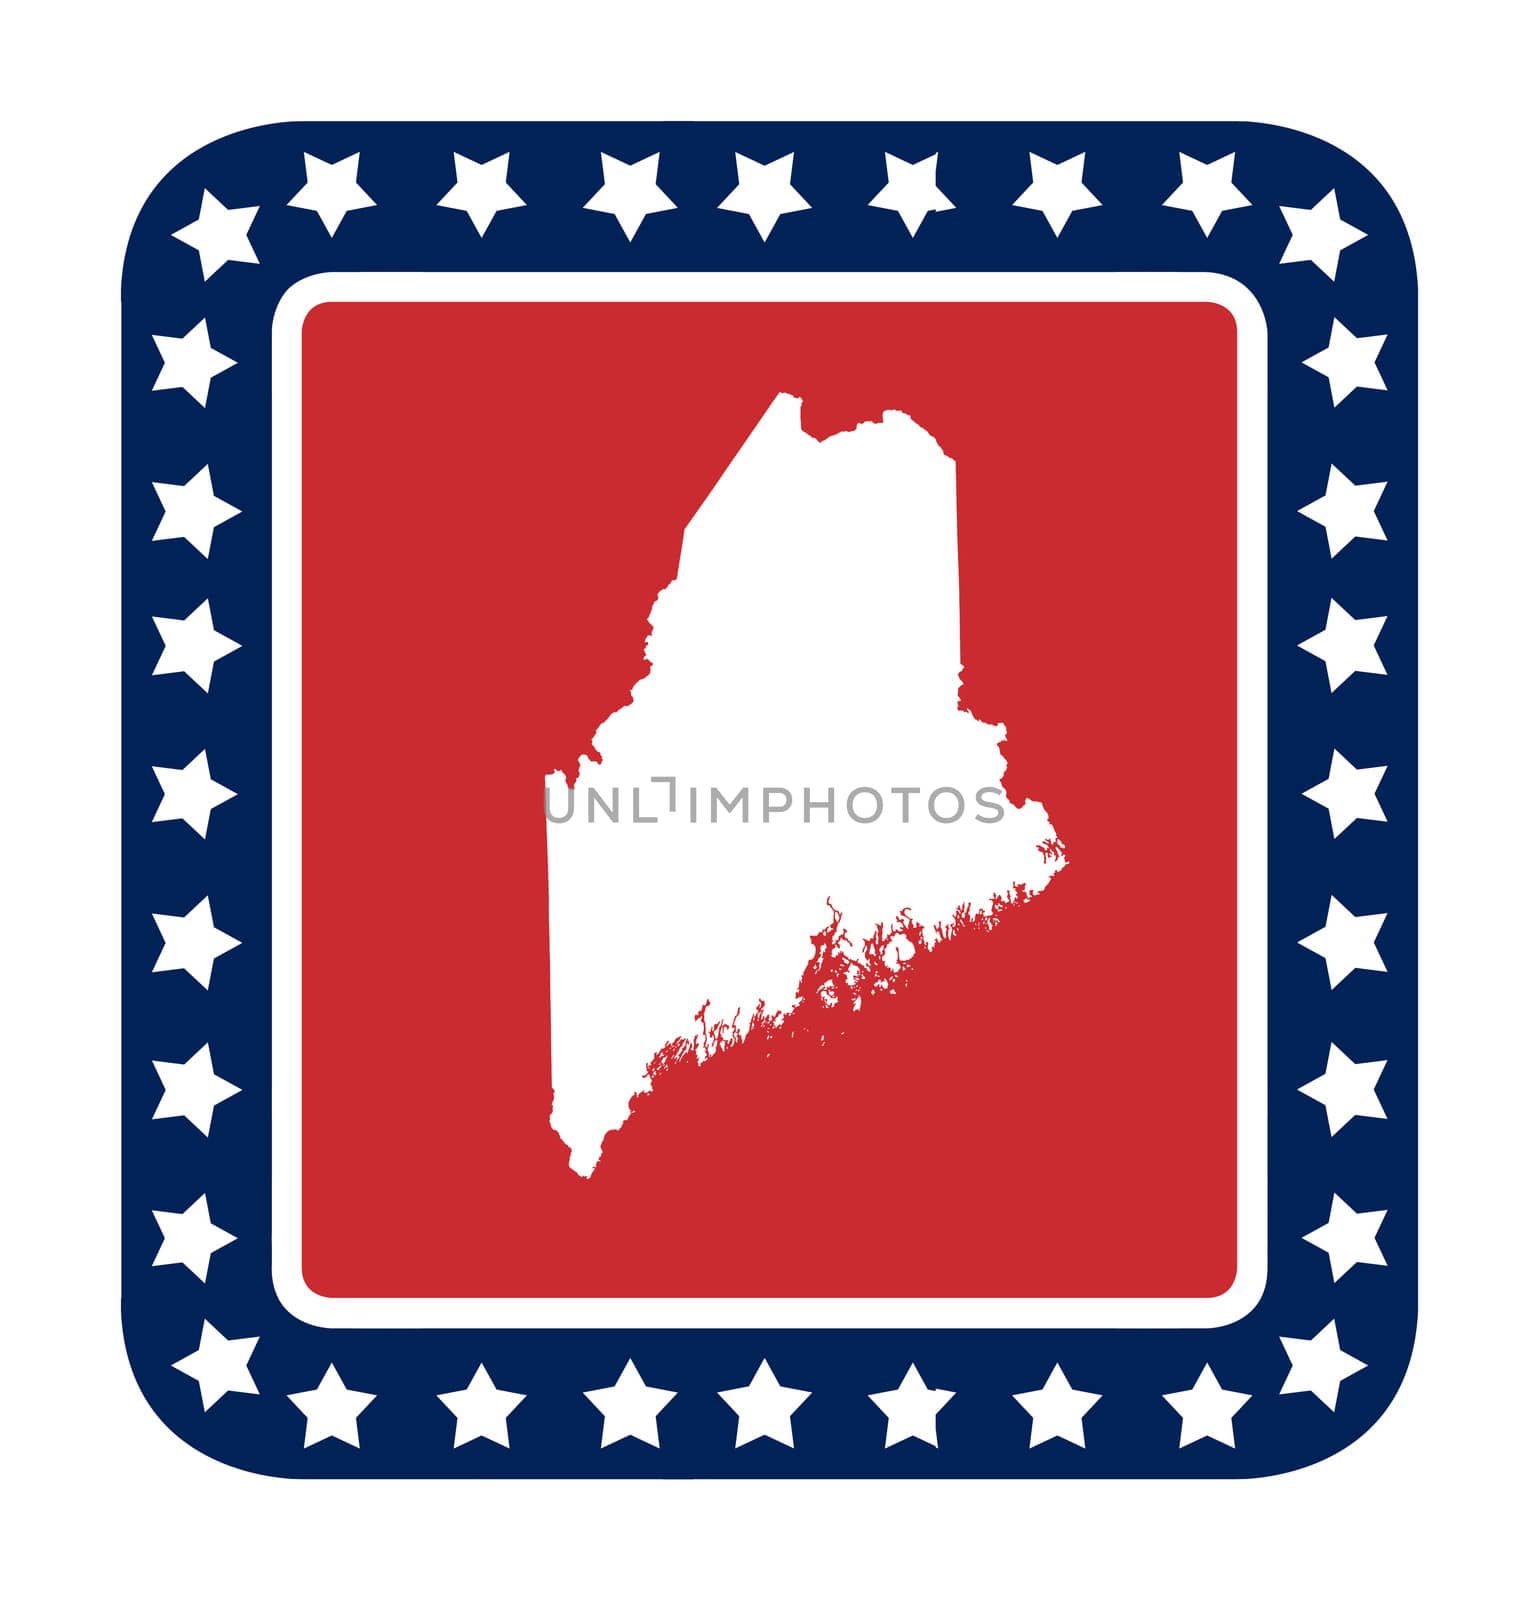 Maine state button on American flag in flat web design style, isolated on white background.